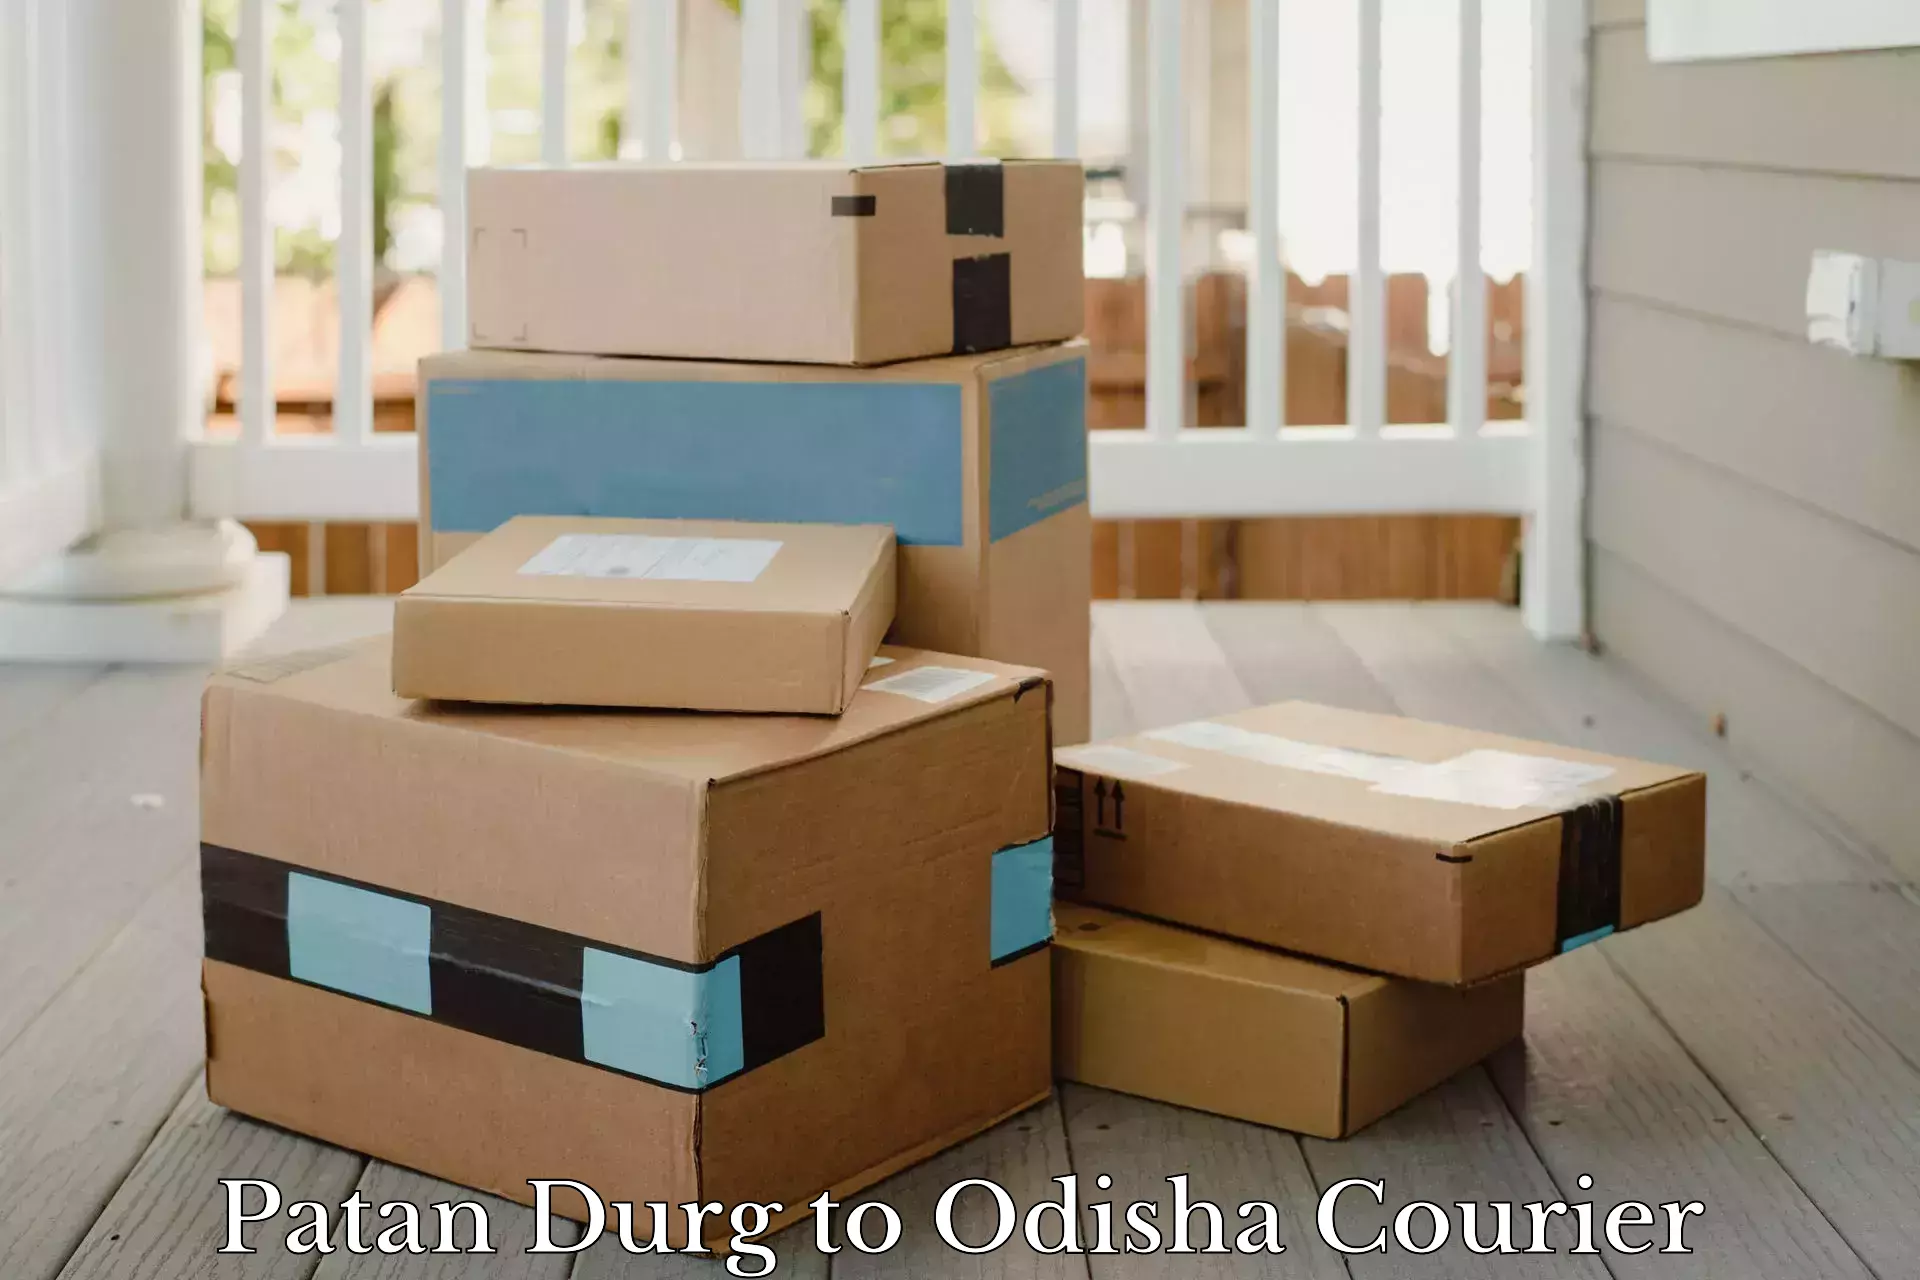 Reliable shipping partners Patan Durg to Jharsuguda